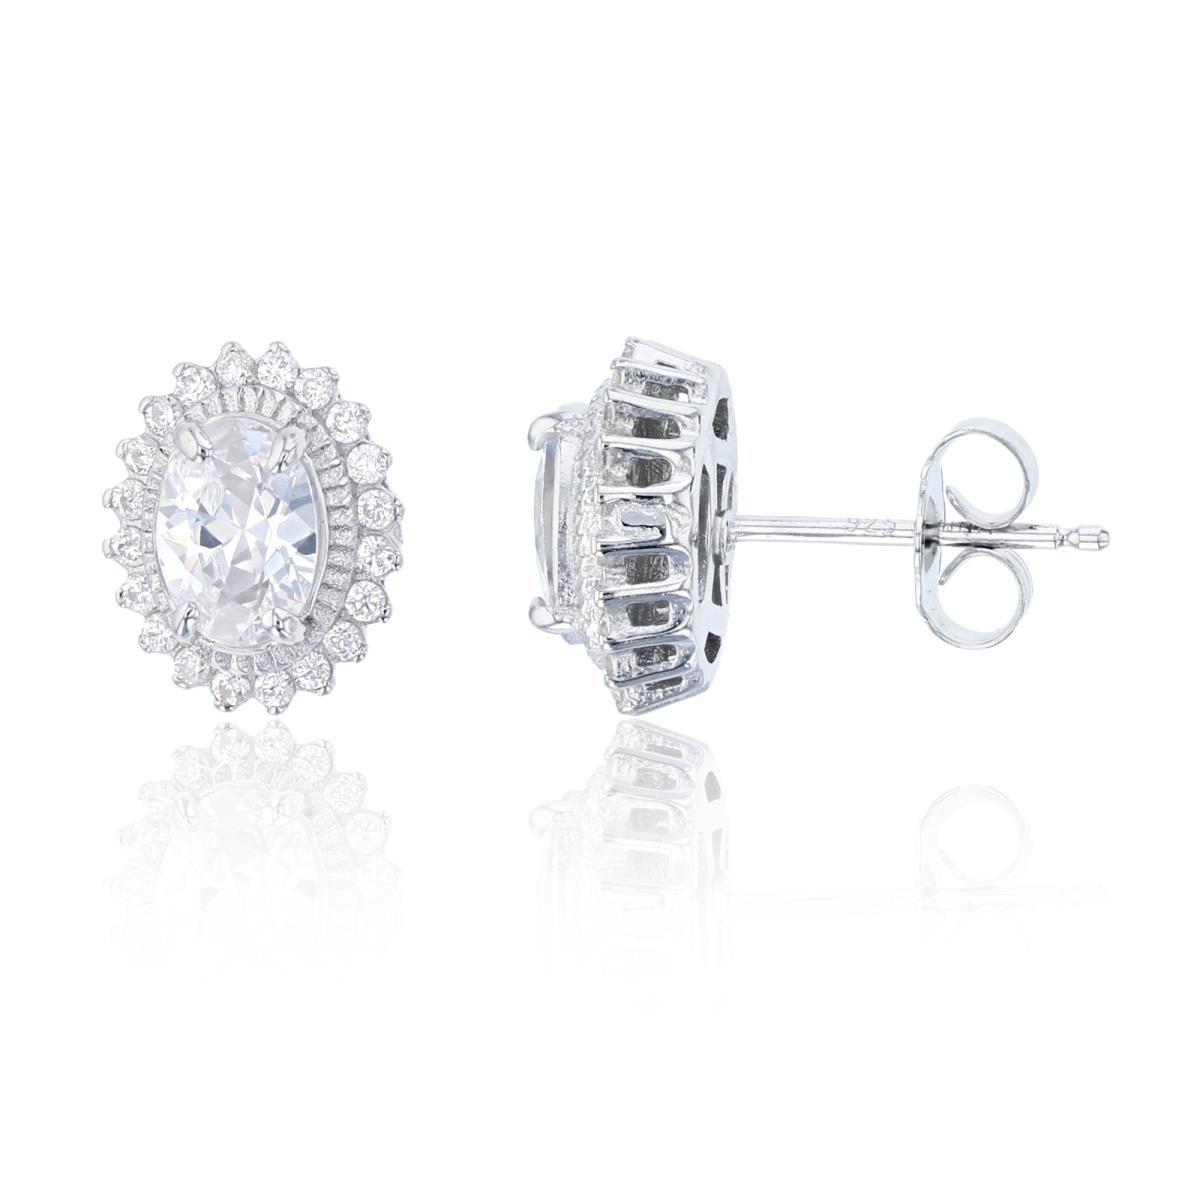 Sterling Silver Oval 7x5mm Pave Halo Stud Earrings